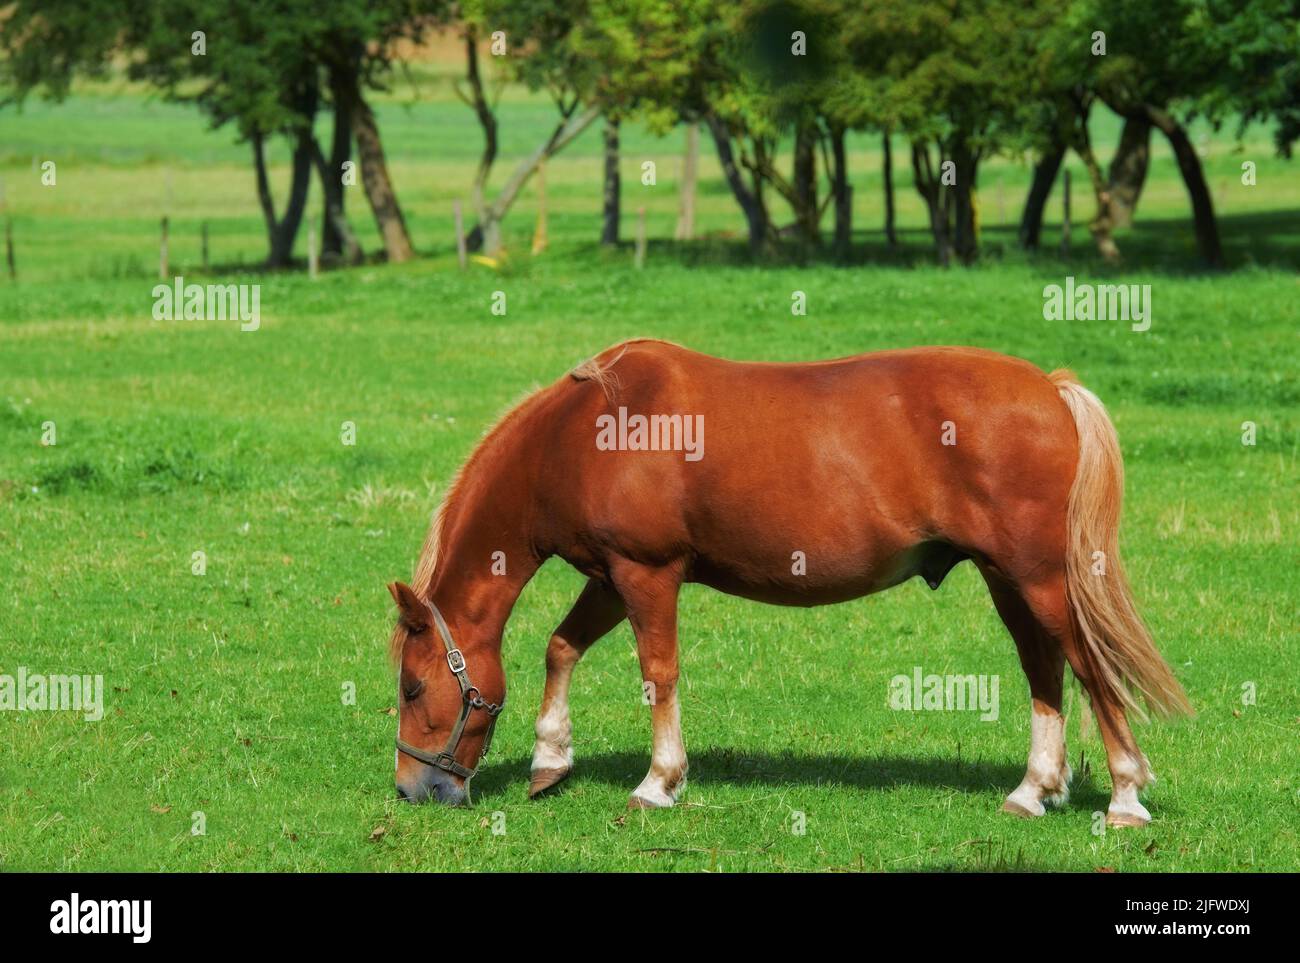 Beautiful brown horse grazing grassland pasturage on a farm during a summer day. Mammal feeding on lush green grass with trees or nature in the Stock Photo